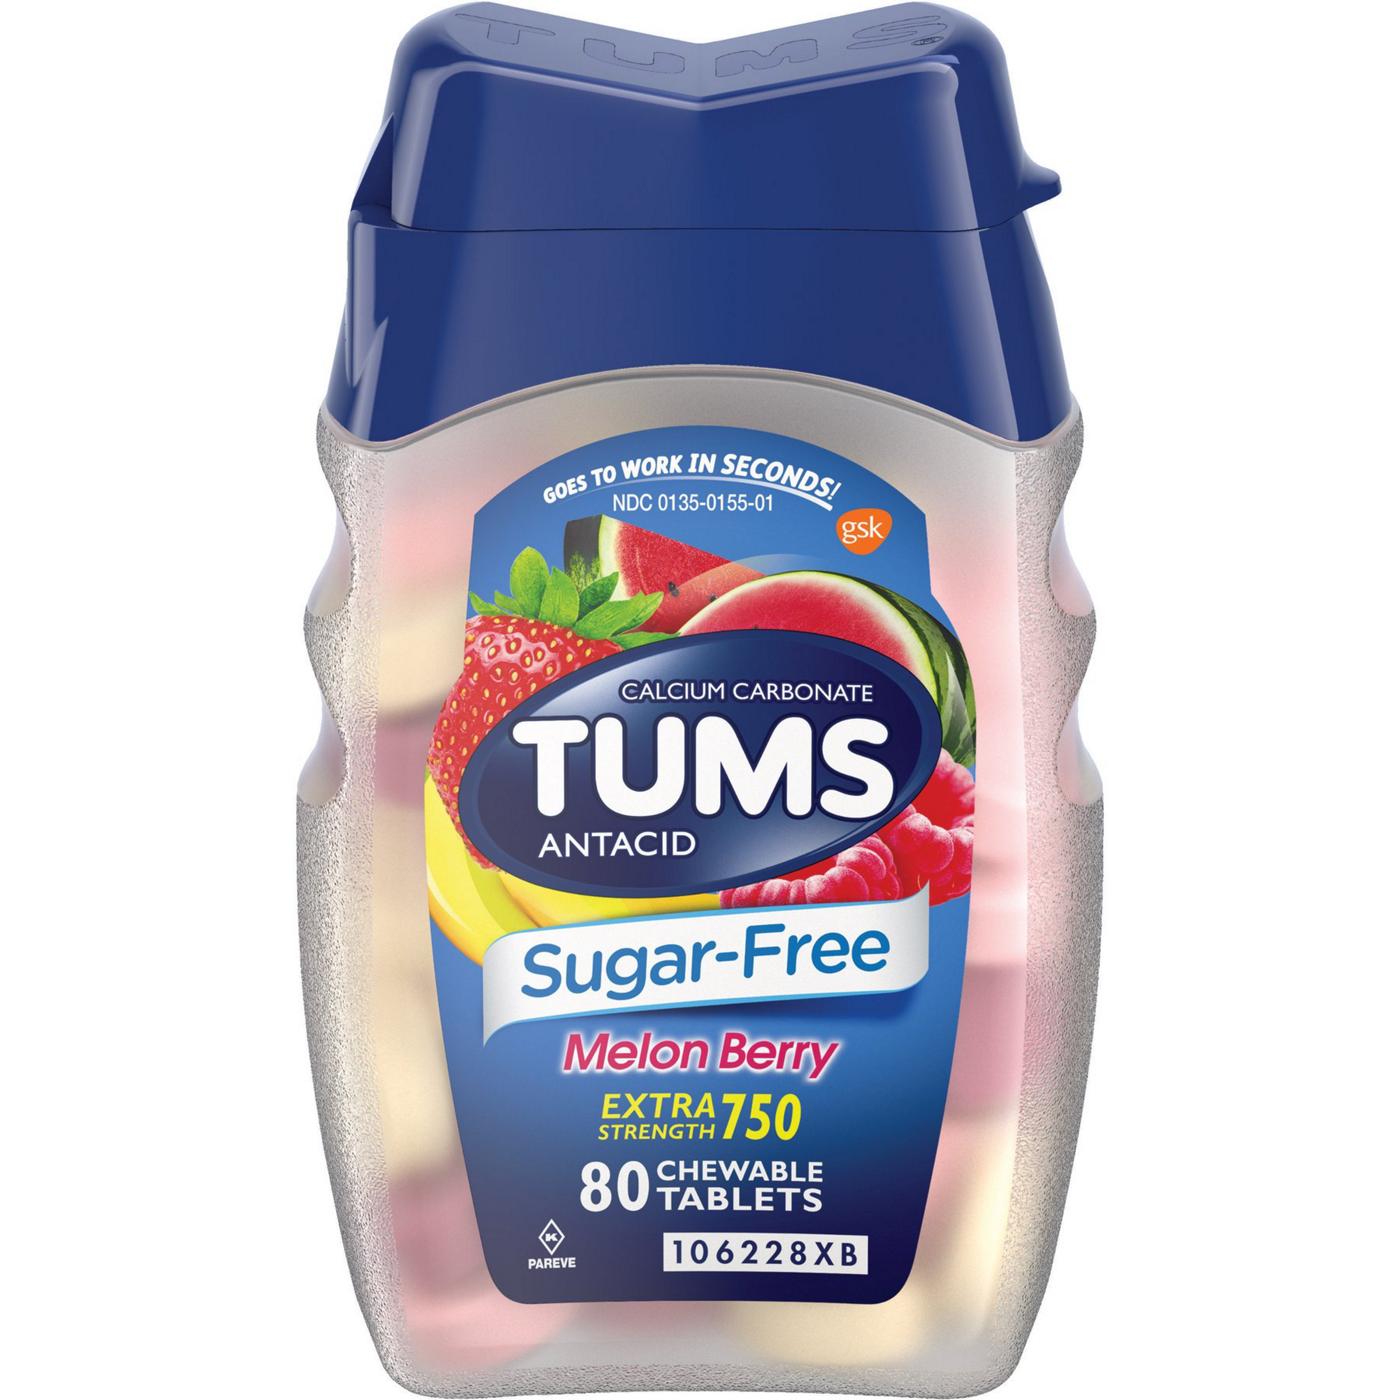 Tums Antacid Sugar Free Chewable Tablets - Melon Berry; image 1 of 7